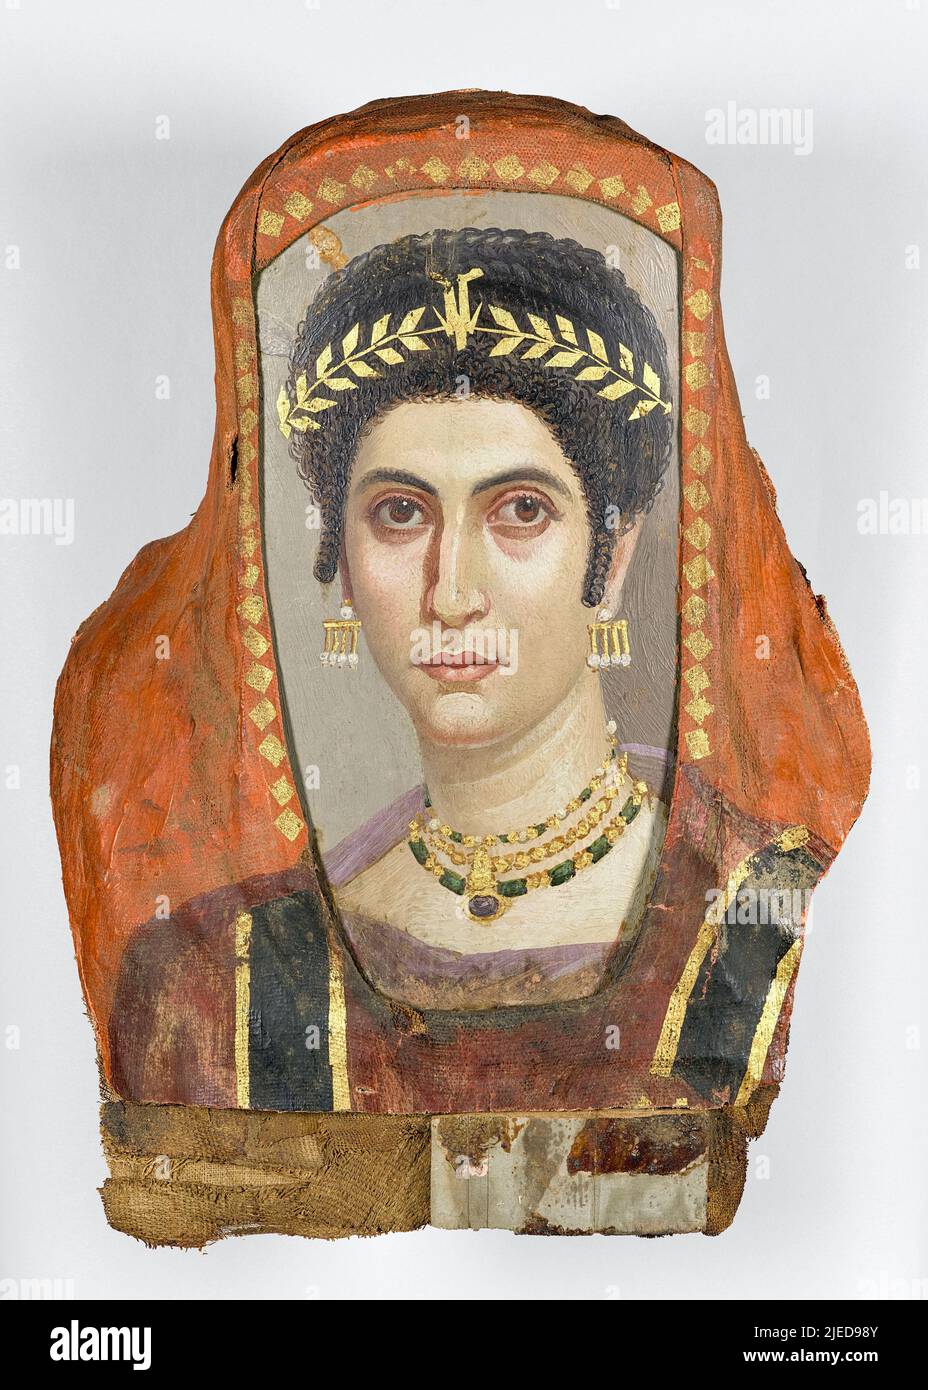 Romano-Egyptian portrait of Isidora originally attached to her mummy encasement which has been carbon dated to between 43BC and 122AD. Stock Photo